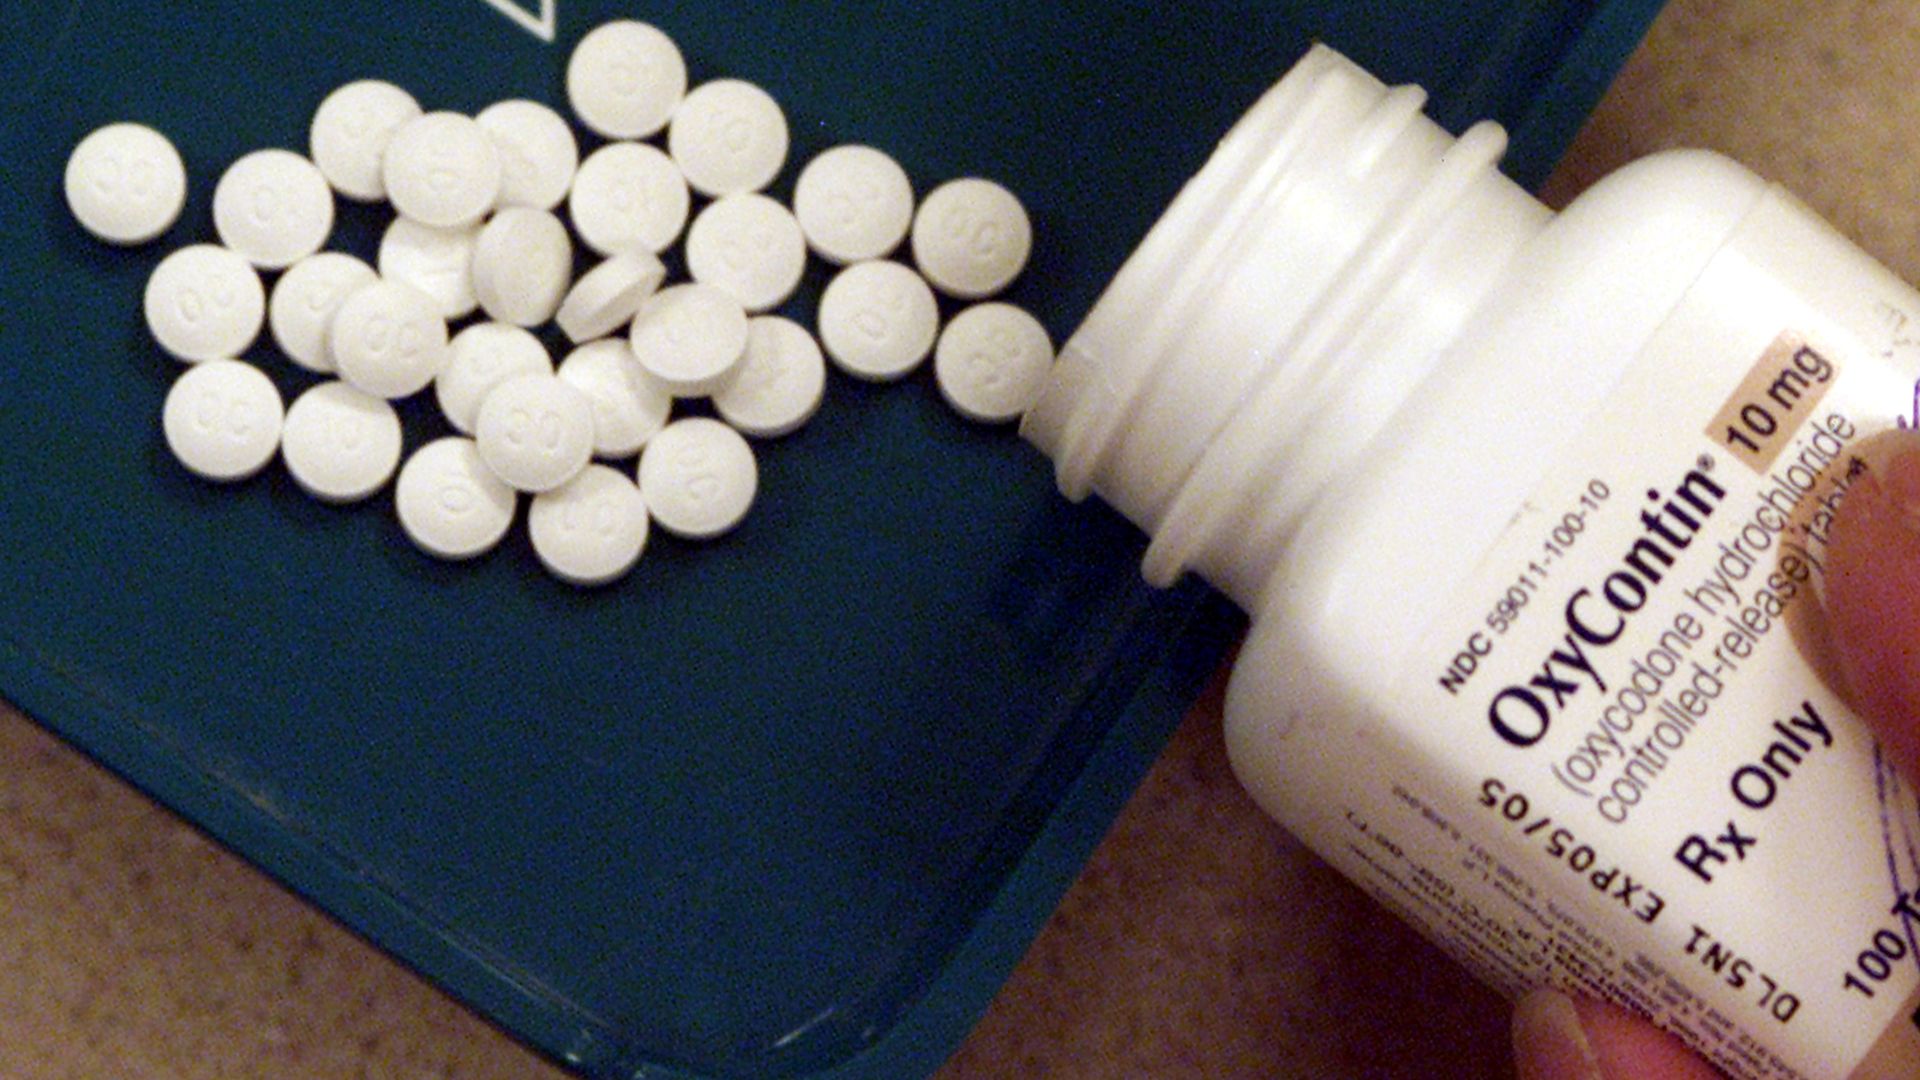 In this image, small white round pills spill out of a white bottle.